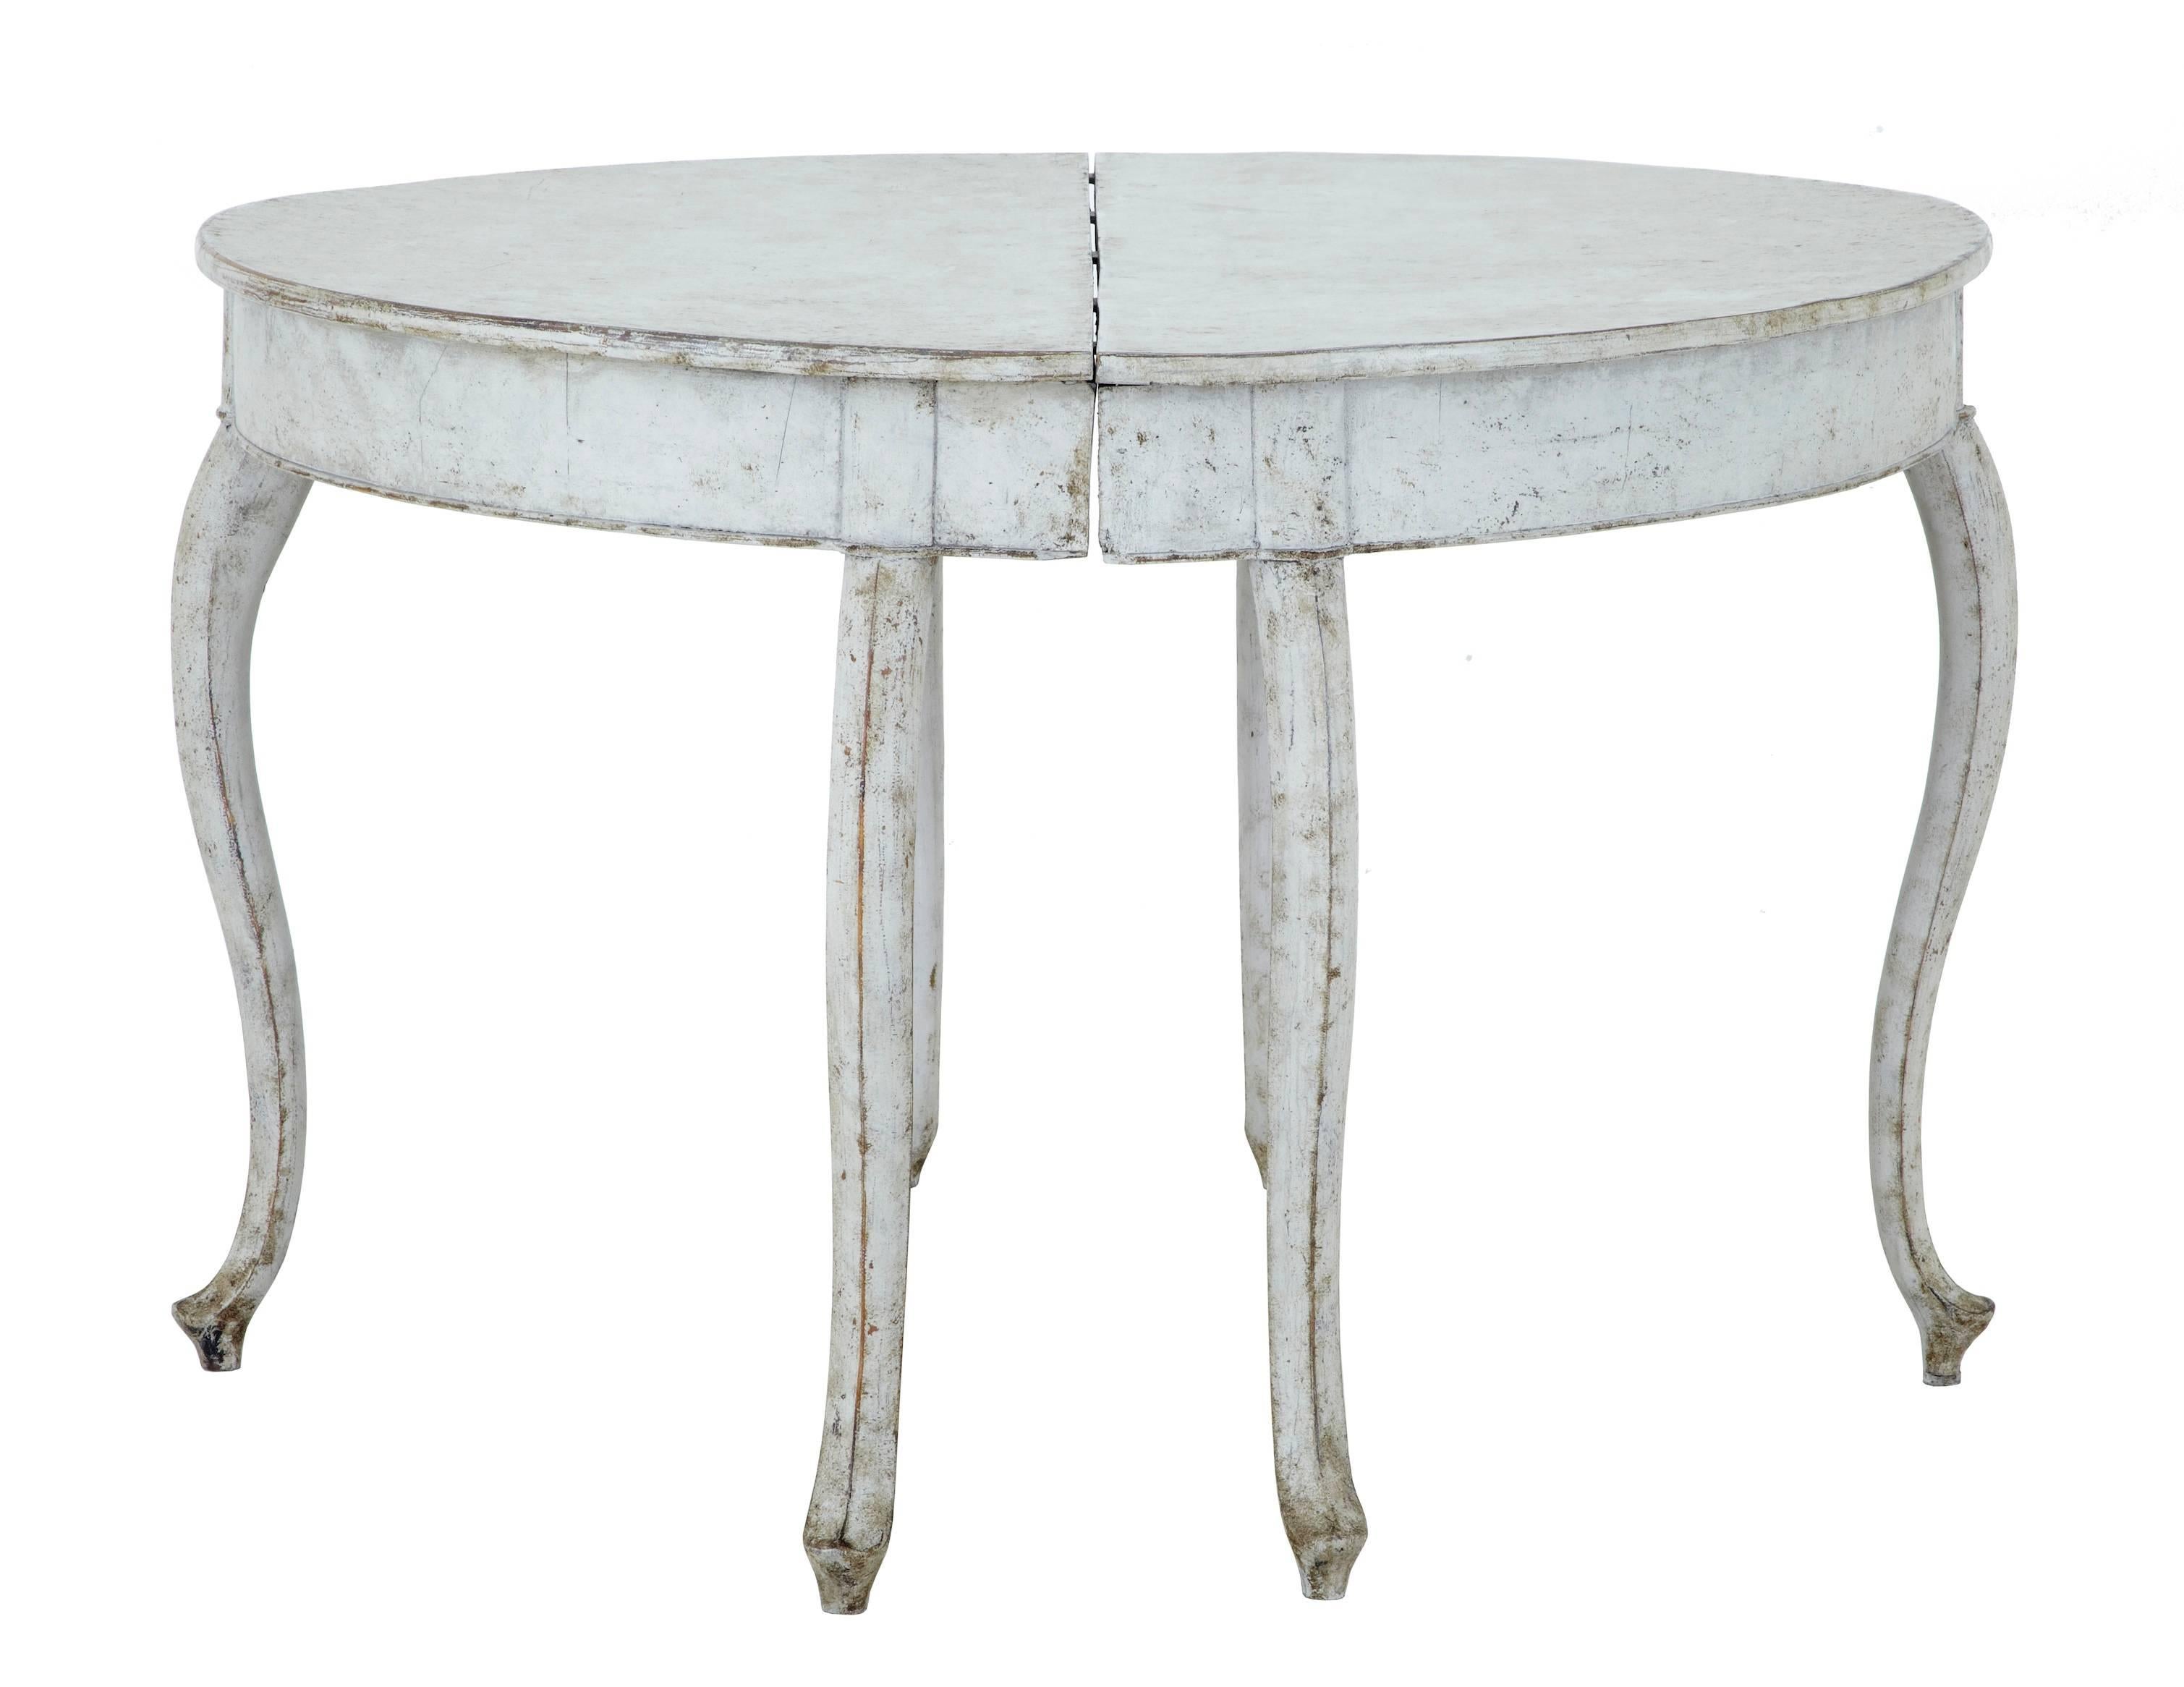 Pair of Swedish painted demilune tables, circa 1880.
Formerly from a dining table, these pair of d end tables now serve well as side tables and still have the capacity to form a round table.
Made from pine, the later paint has now taken on a used